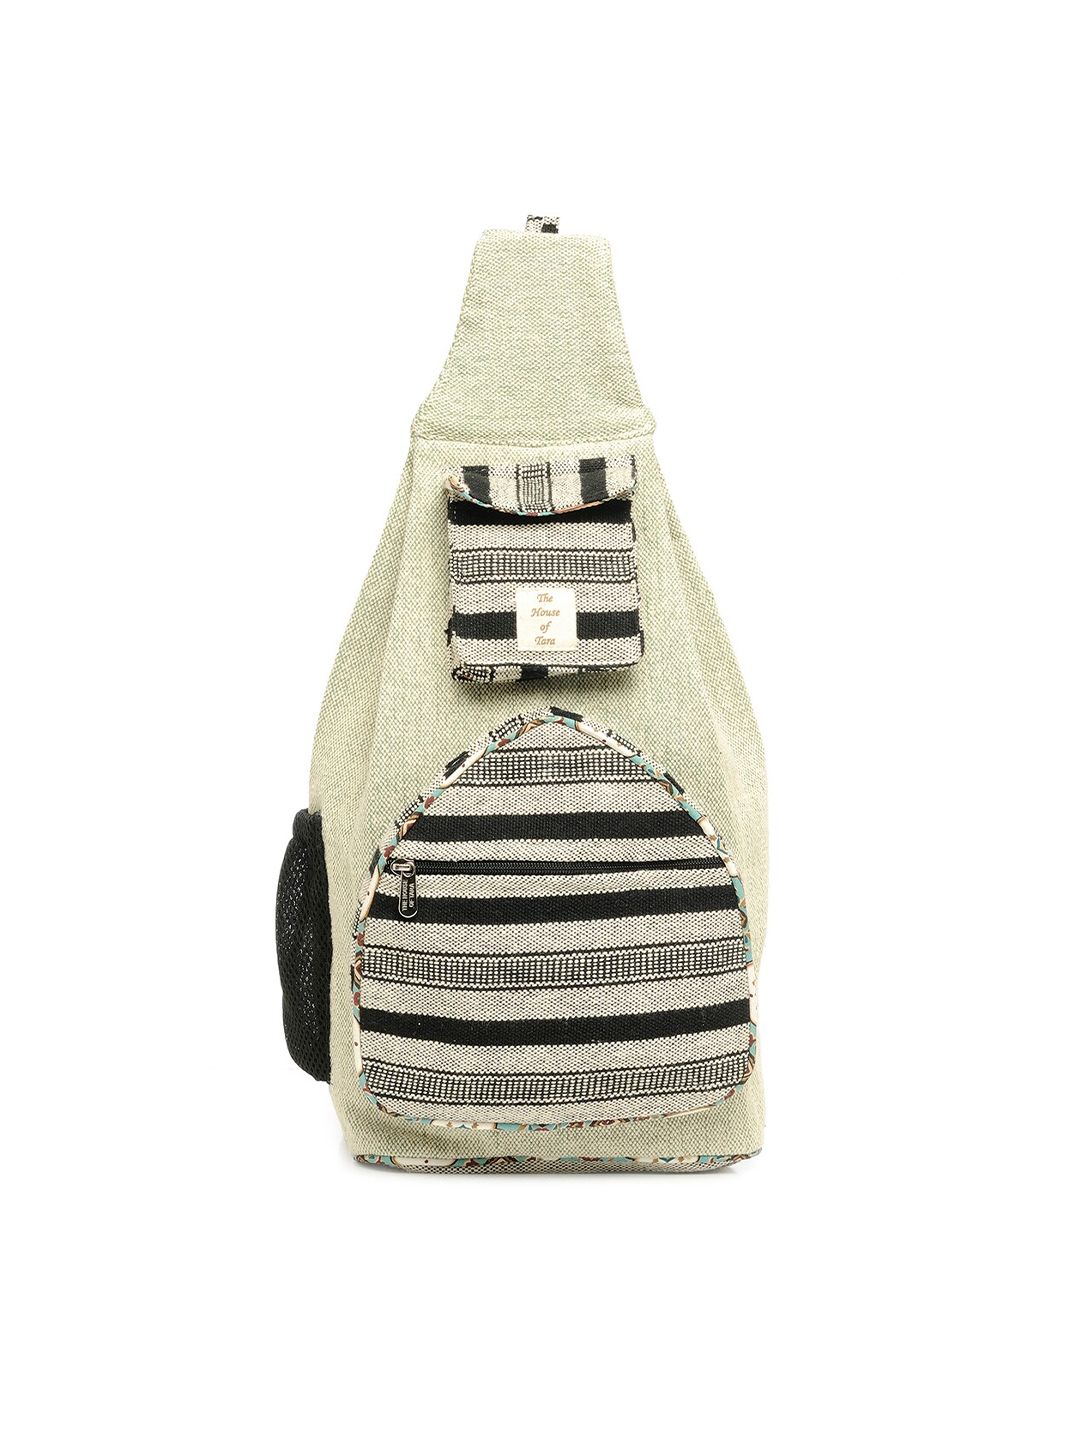 The House of Tara Unisex Grey Striped Backpack Price in India